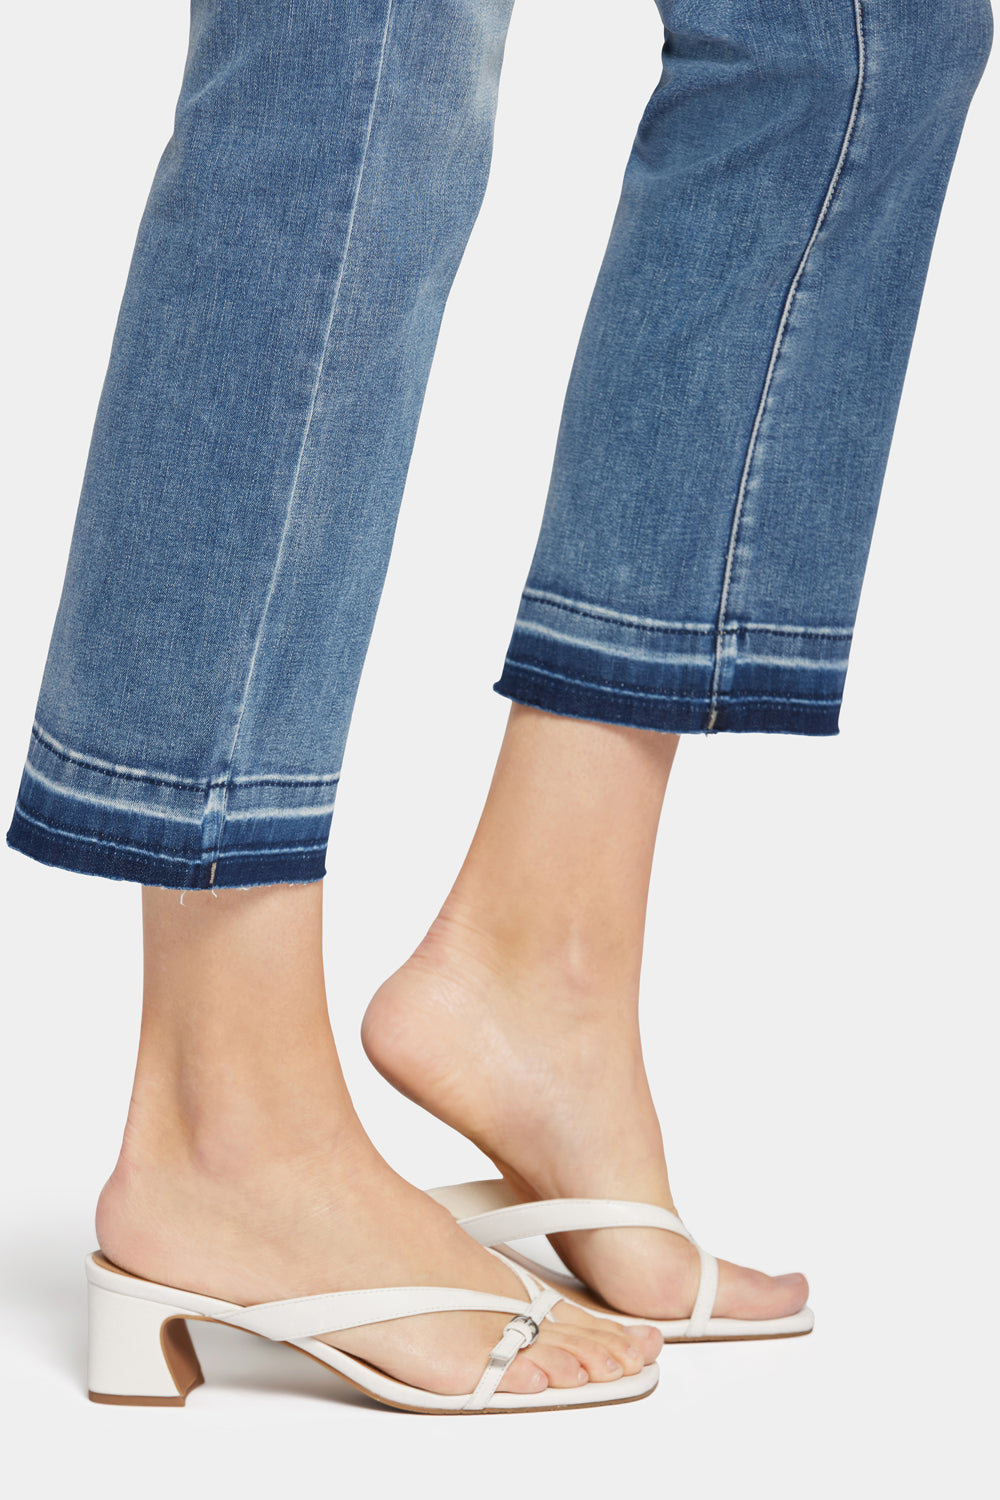 NYDJ Marilyn Straight Ankle Jeans In Petite In Cool Embrace® Denim With High Rise And Released Hems - Fantasy